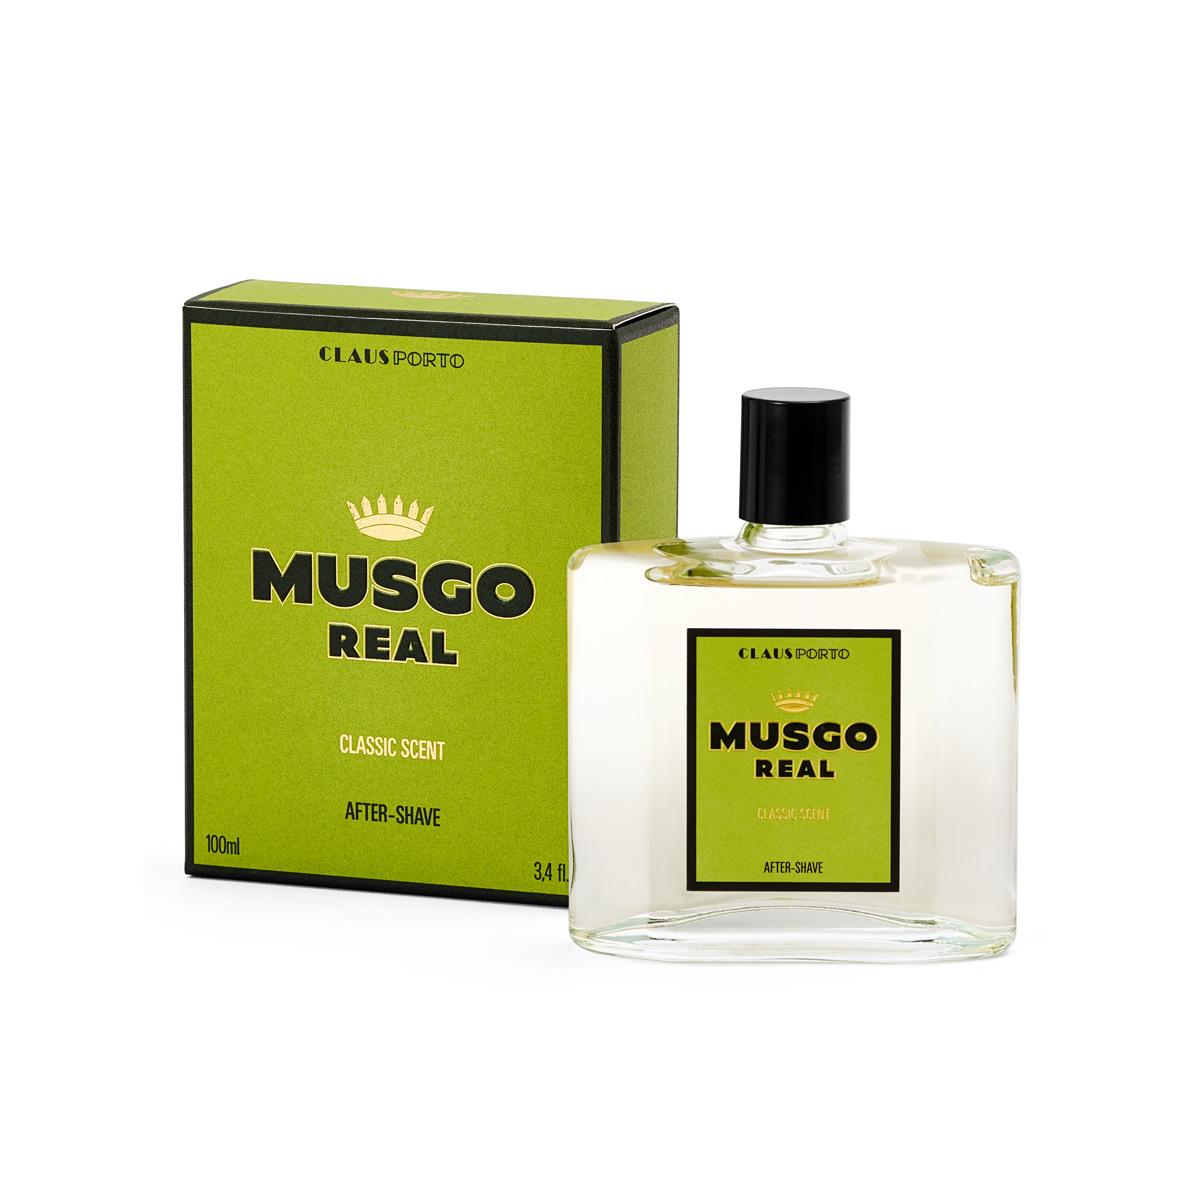 Musgo Real Aftershave Classic Scent 100ml